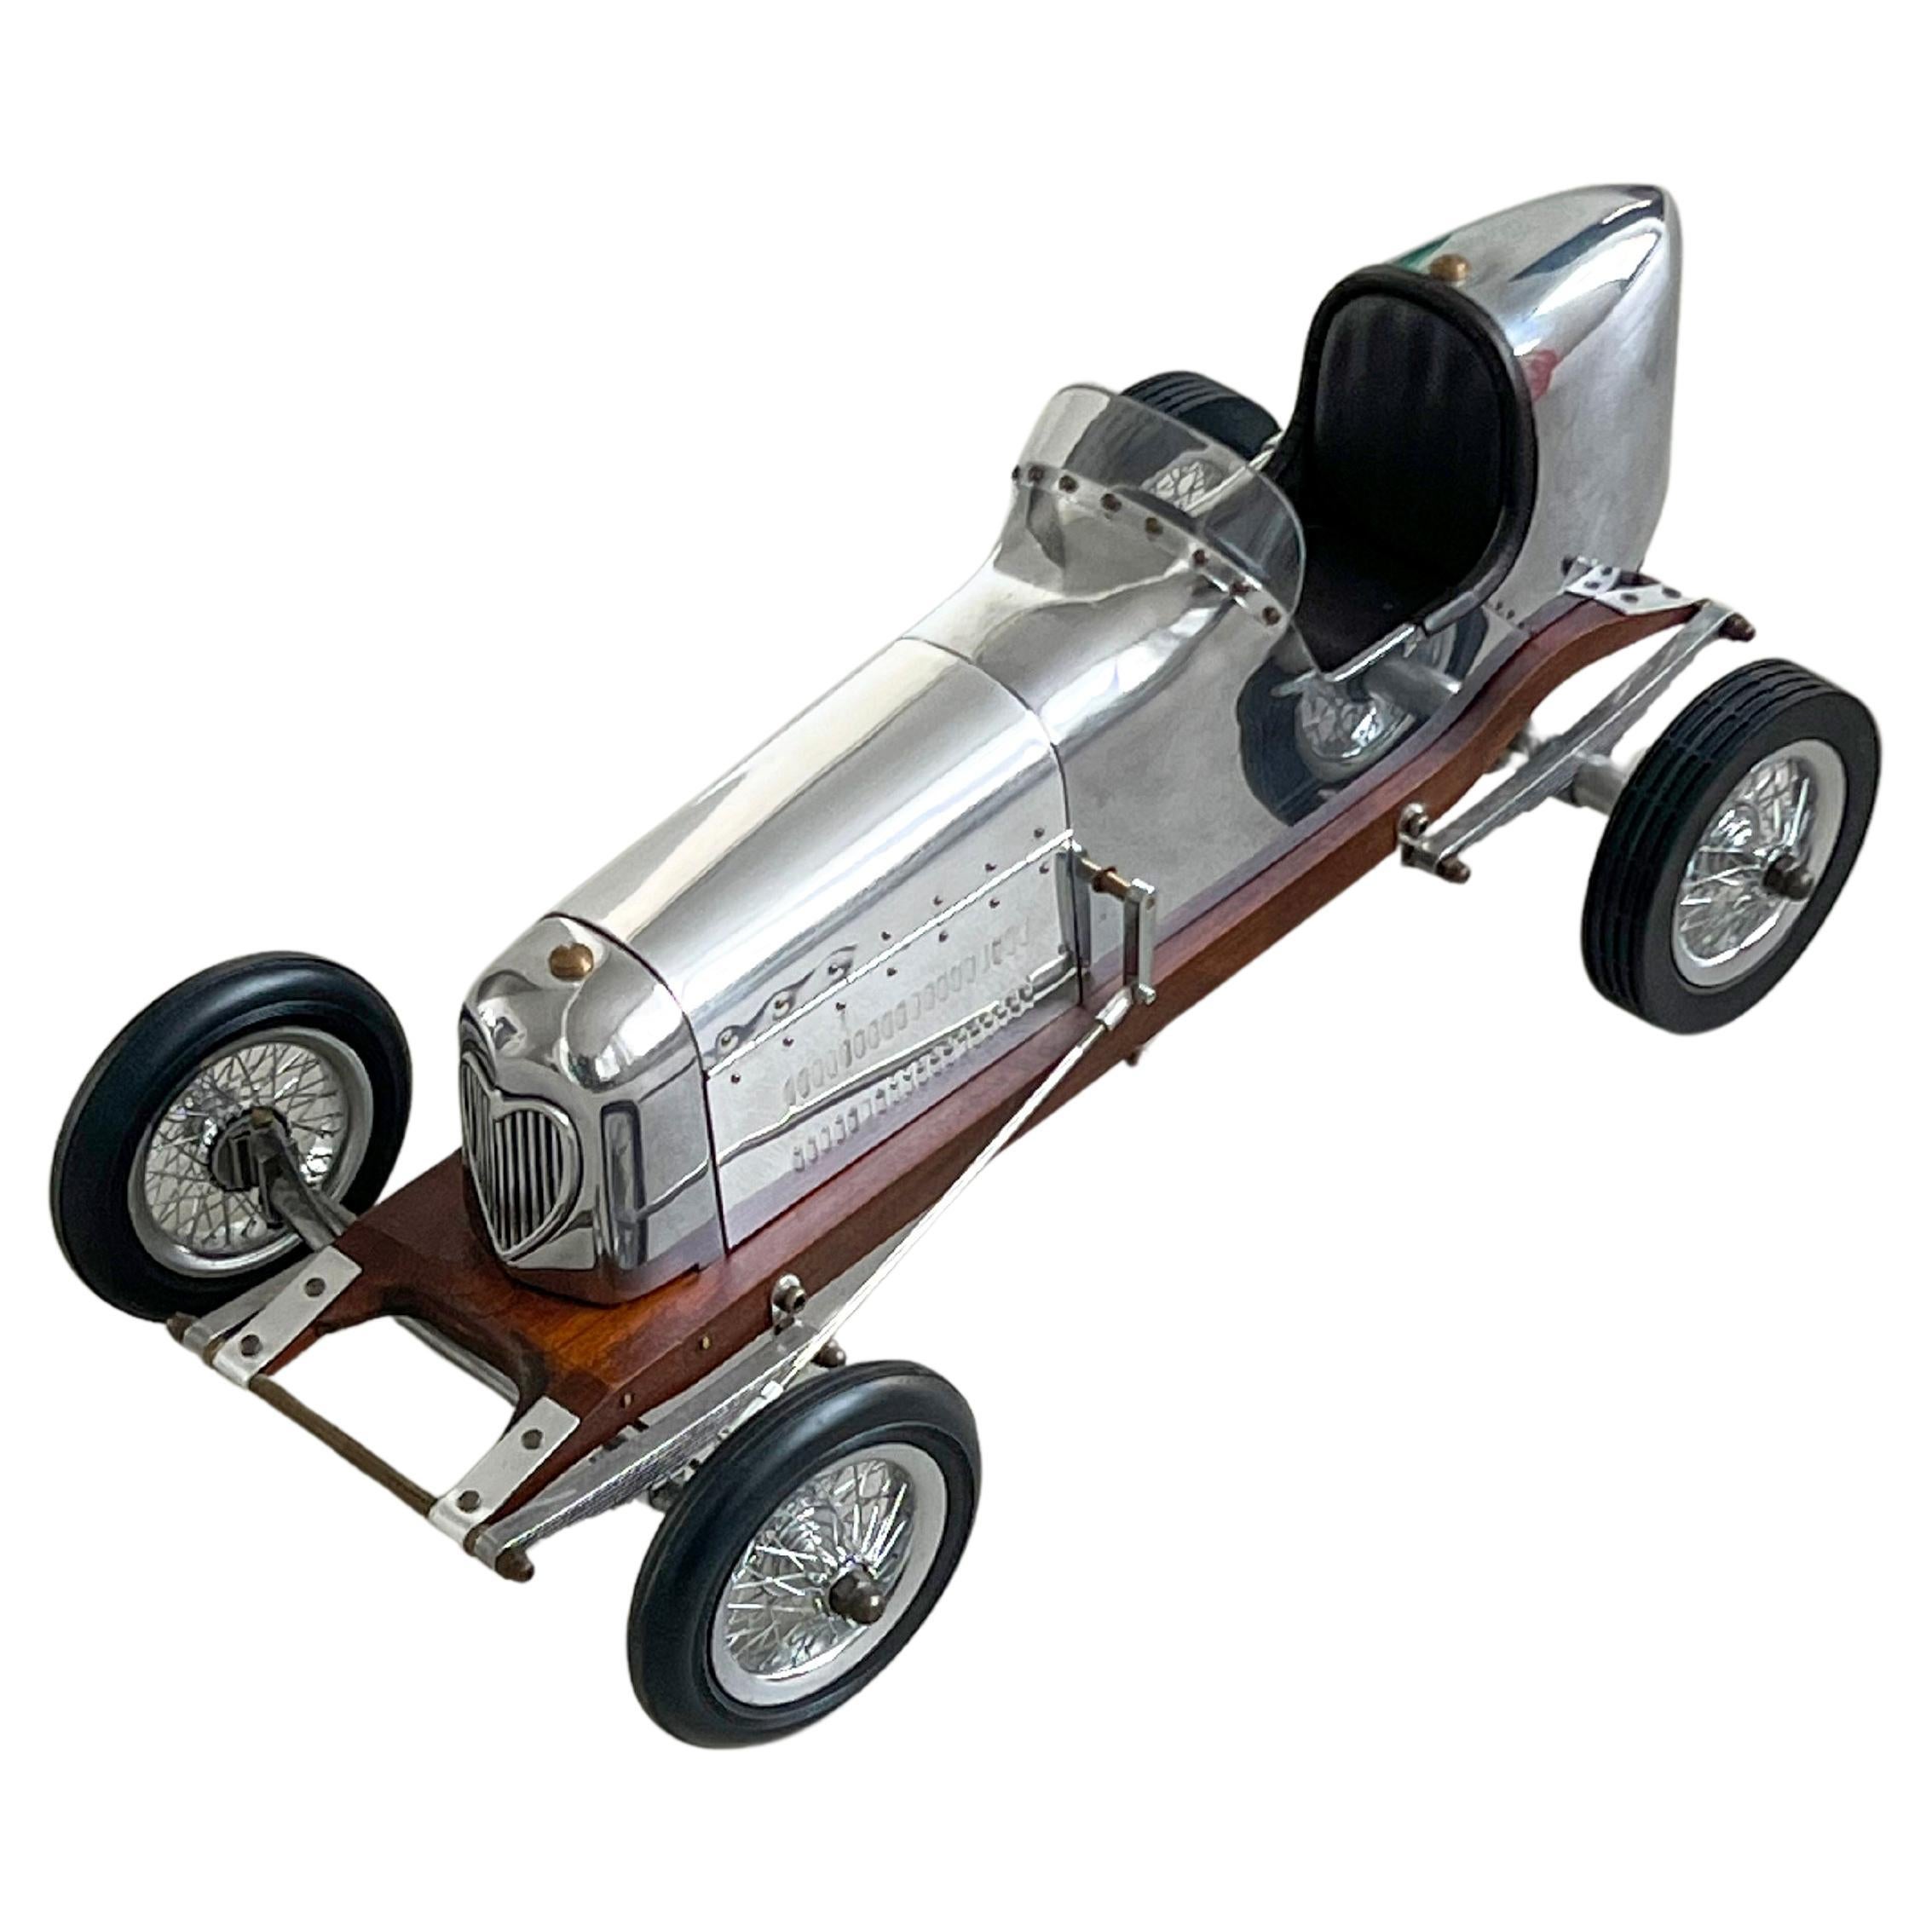 1930s Art Deco Race Car Metal Model, Highly Detailed, Collectible Decorative  For Sale